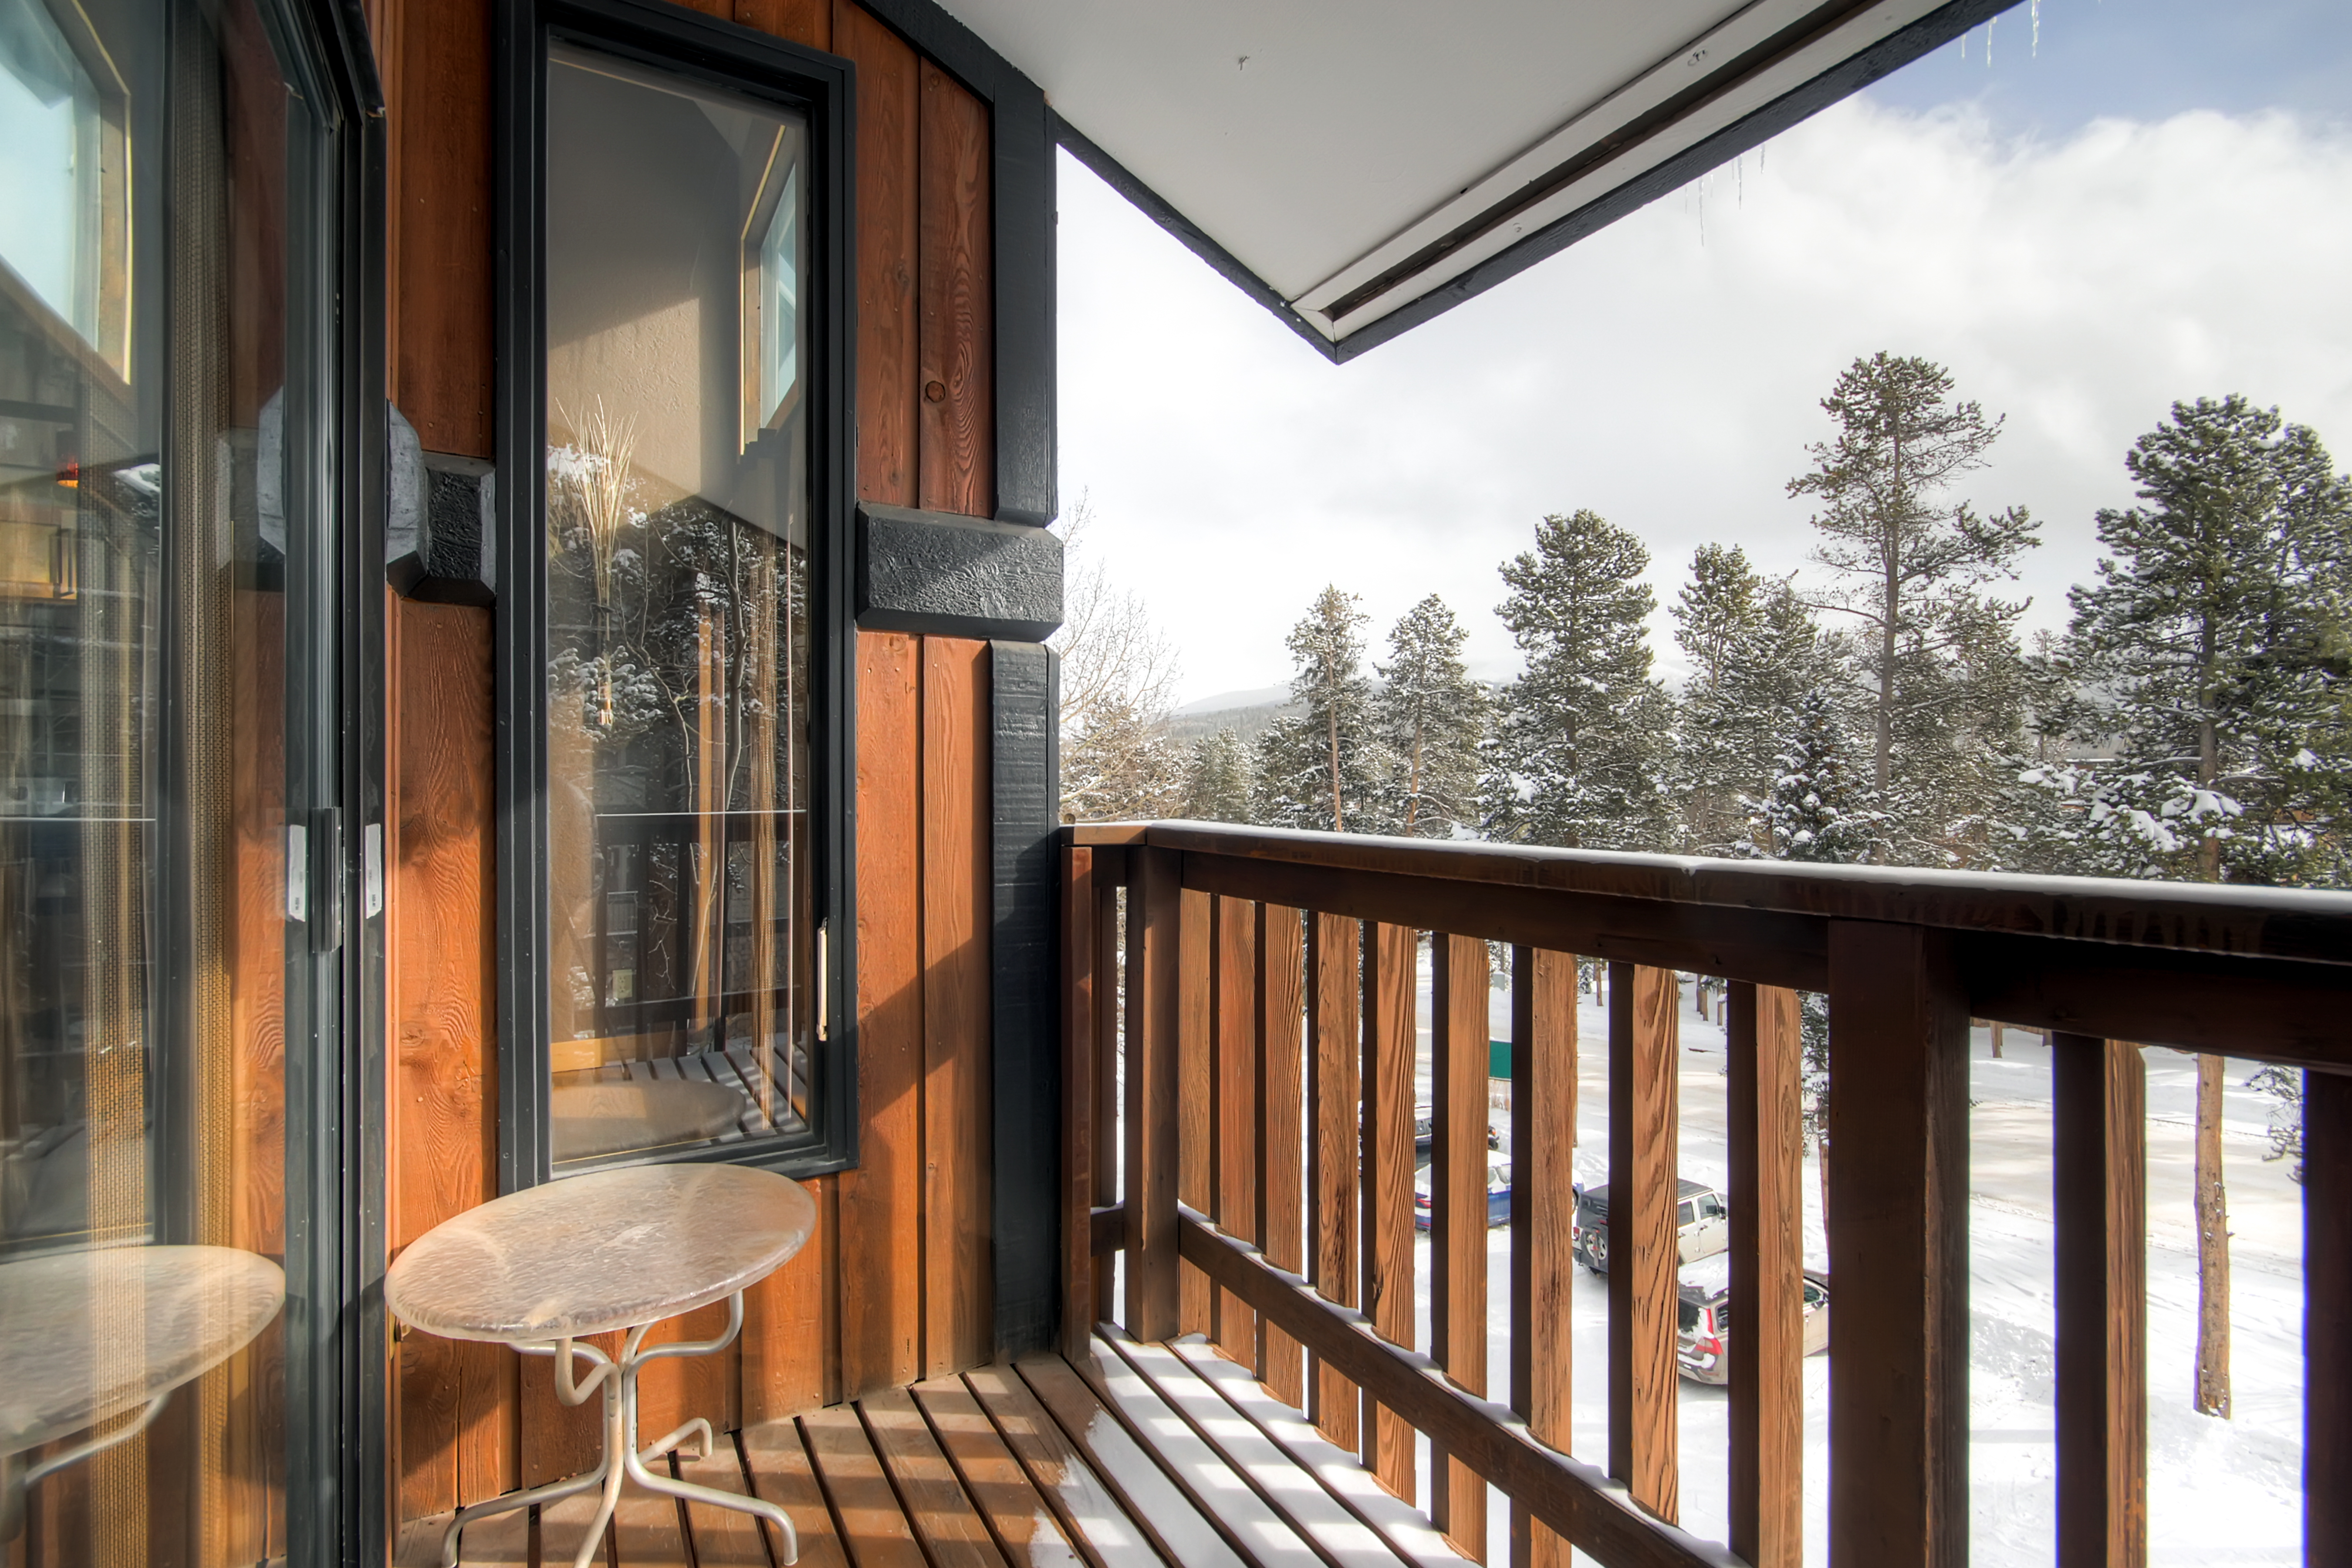 Enjoy the mountain views from this private balcony.